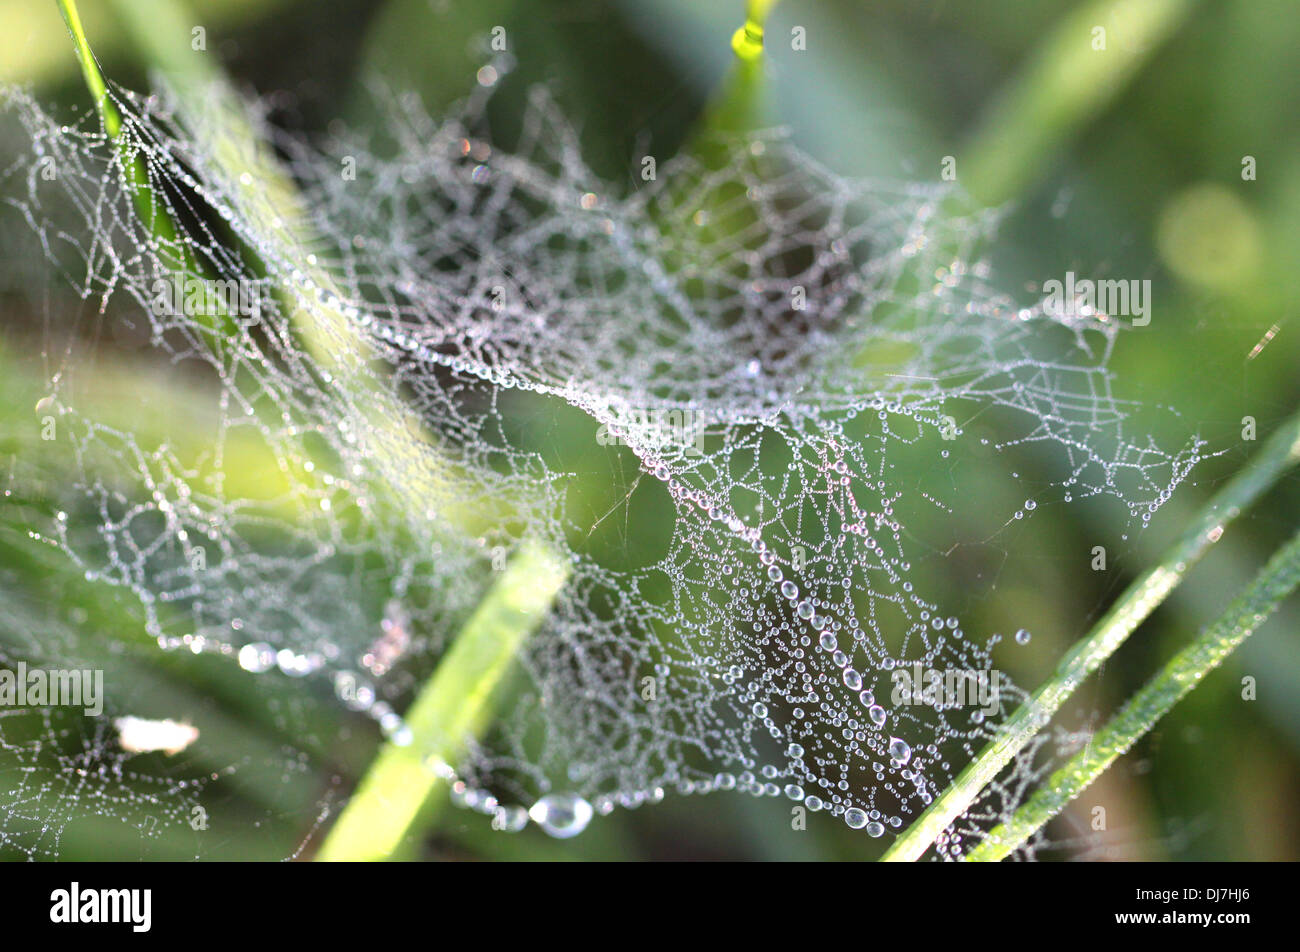 Drops of dew on  spider web in the grass Stock Photo